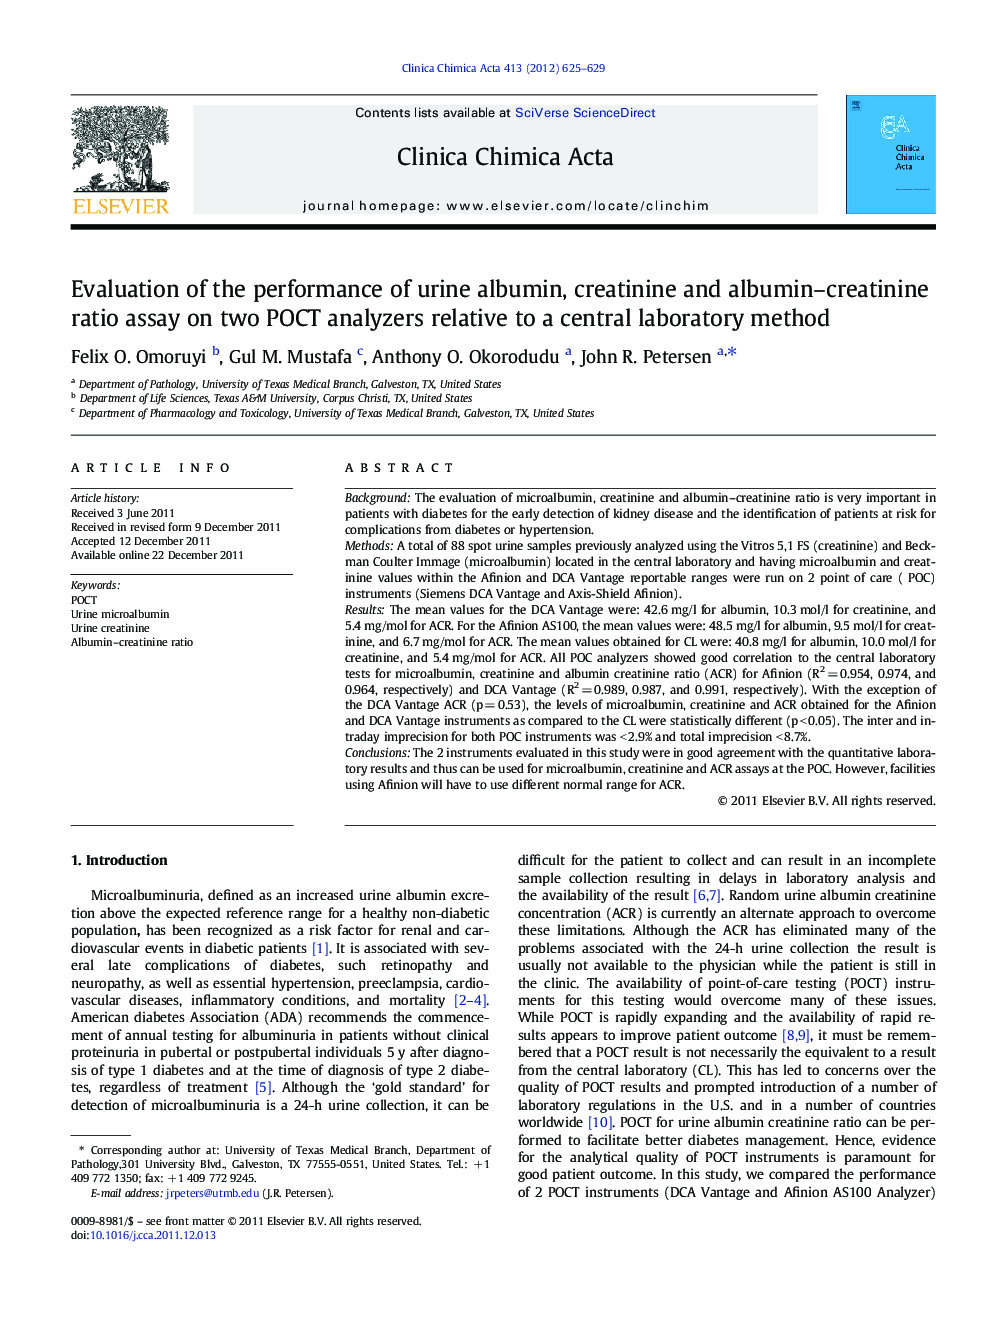 Evaluation of the performance of urine albumin, creatinine and albumin–creatinine ratio assay on two POCT analyzers relative to a central laboratory method